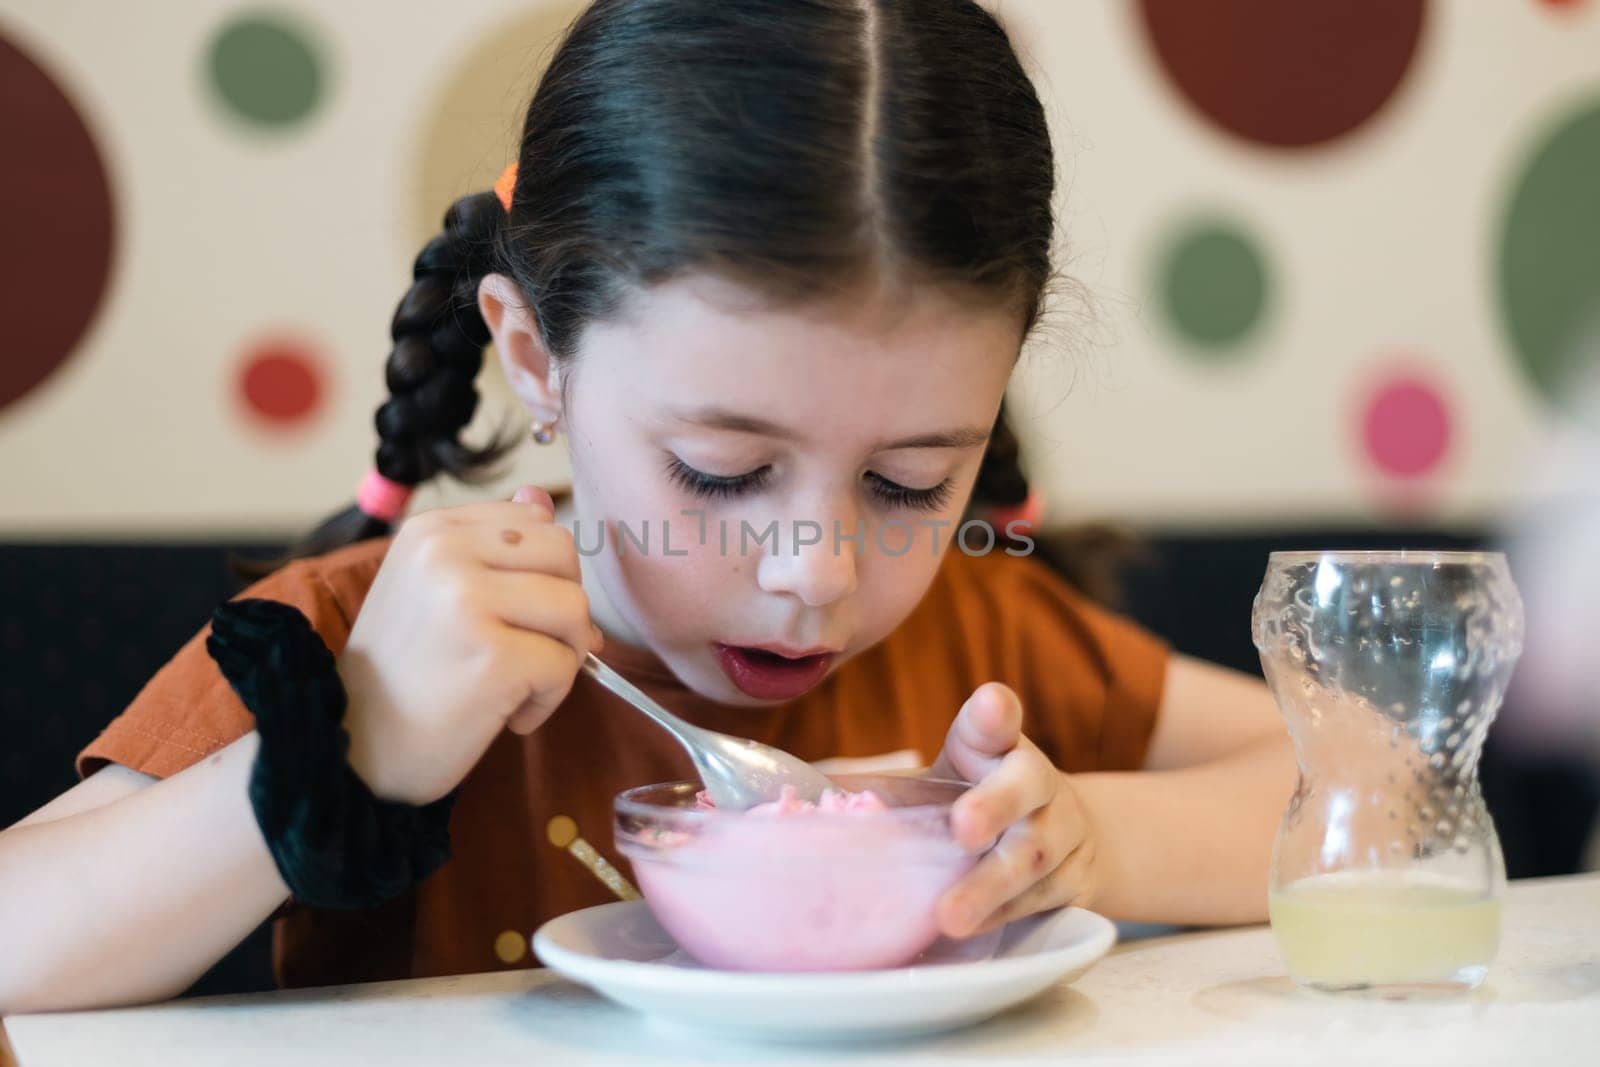 Portrait of one beautiful caucasian brunette girl looking with surprise and eating ice cream while sitting on a sofa in a cafe against the background of an abstract wall, close-up side view.